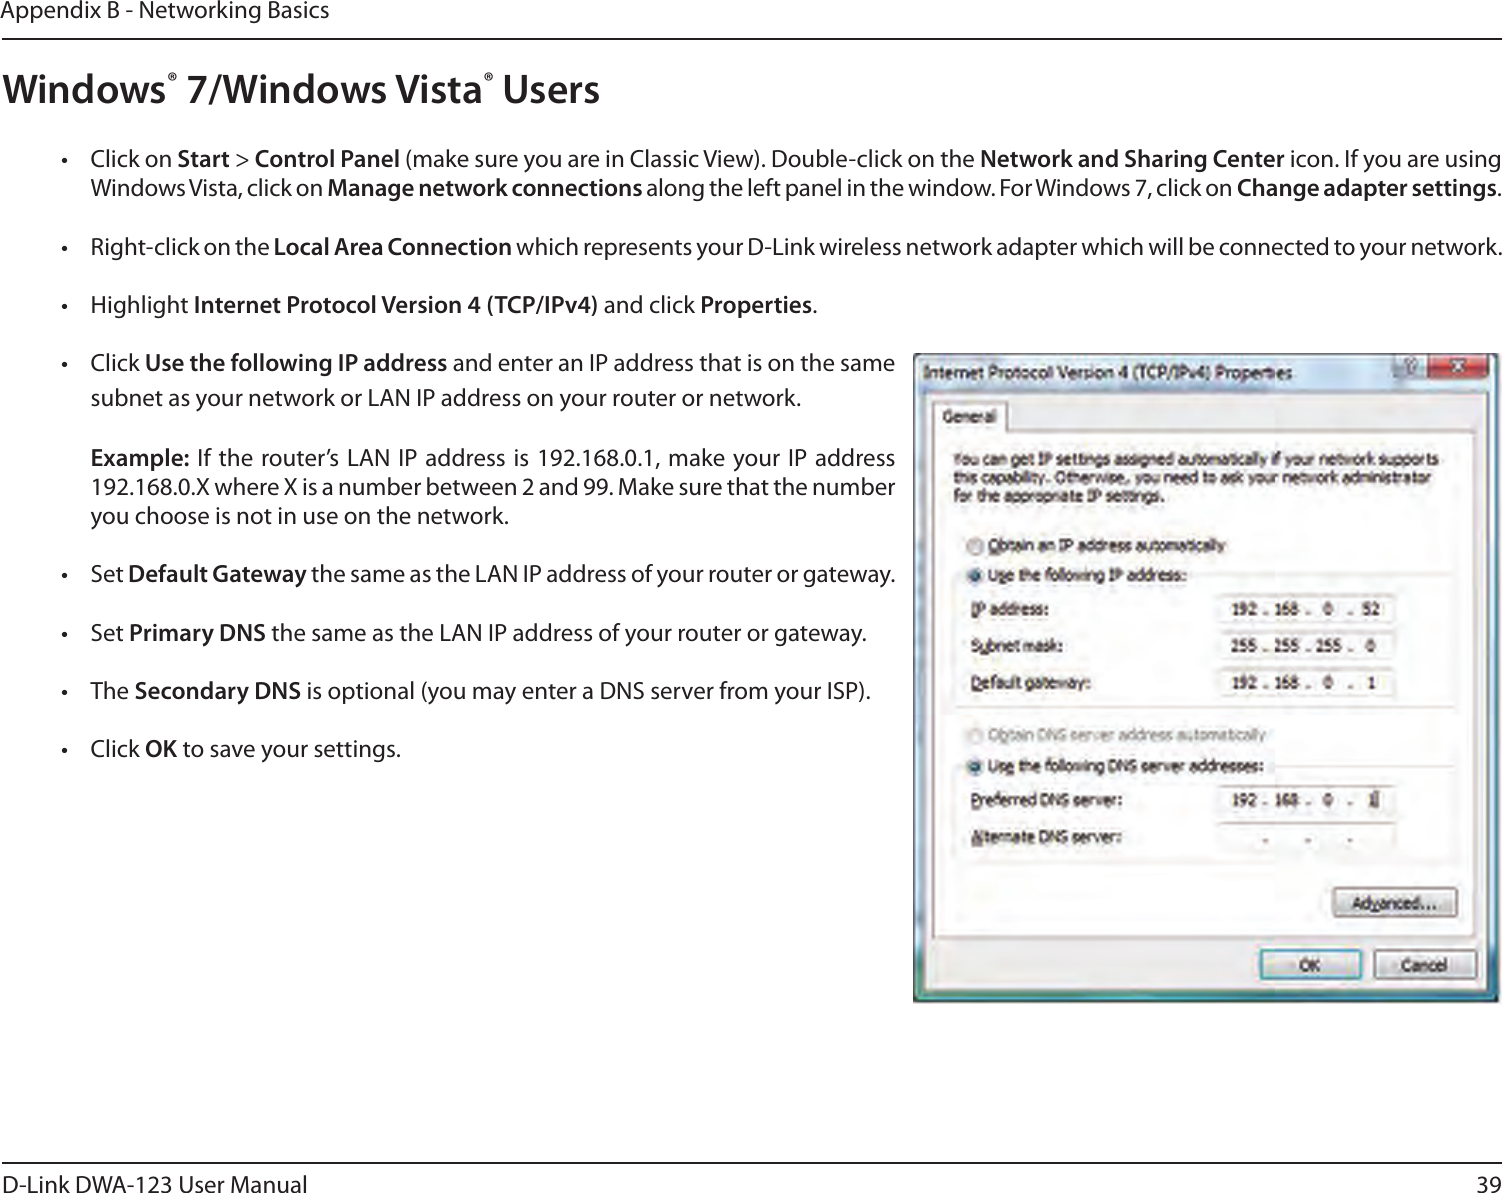 39D-Link DWA-123 User ManualAppendix B - Networking BasicsWindows® 7/Windows Vista® Users•  Click on Start &gt; Control Panel (make sure you are in Classic View). Double-click on the Network and Sharing Center icon. If you are using Windows Vista, click on Manage network connections along the left panel in the window. For Windows 7, click on Change adapter settings.•  Right-click on the Local Area Connection which represents your D-Link wireless network adapter which will be connected to your network.•  Highlight Internet Protocol Version 4 (TCP/IPv4) and click Properties.•  Click Use the following IP address and enter an IP address that is on the same subnet as your network or LAN IP address on your router or network. Example: If the router’s LAN IP address is 192.168.0.1, make your IP address 192.168.0.X where X is a number between 2 and 99. Make sure that the number you choose is not in use on the network. •  Set Default Gateway the same as the LAN IP address of your router or gateway.•  Set Primary DNS the same as the LAN IP address of your router or gateway. •  The Secondary DNS is optional (you may enter a DNS server from your ISP).•  Click OK to save your settings.